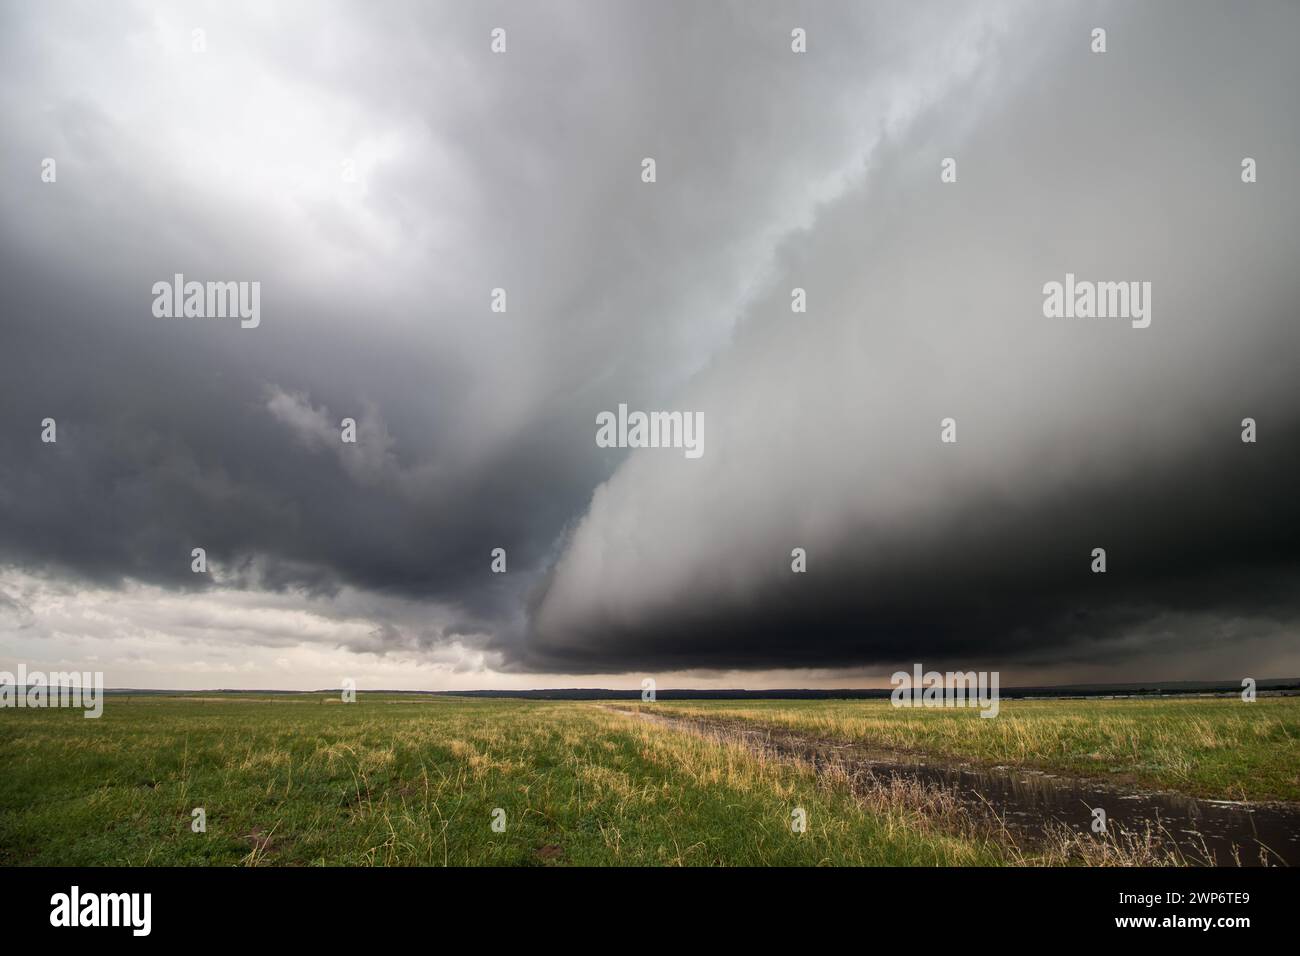 A massive shelf cloud approaches over a flat grassland, bringing rain, wind, and stormy weather. Stock Photo